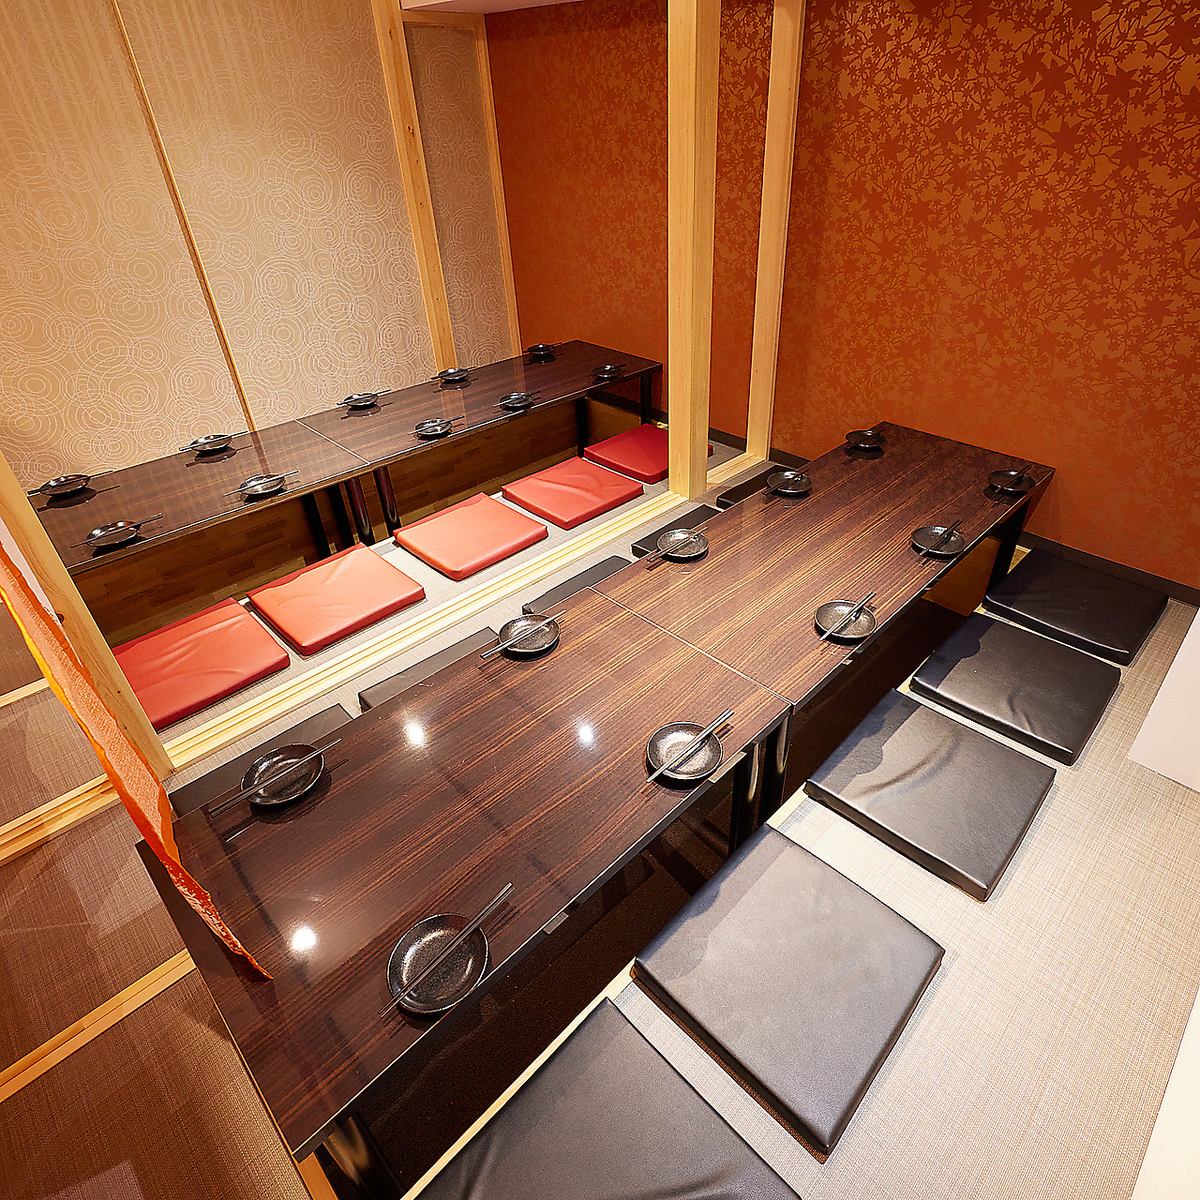 All rooms are equipped with private rooms! 2 seats ~ table seats, sofa seats, couple seats, etc.